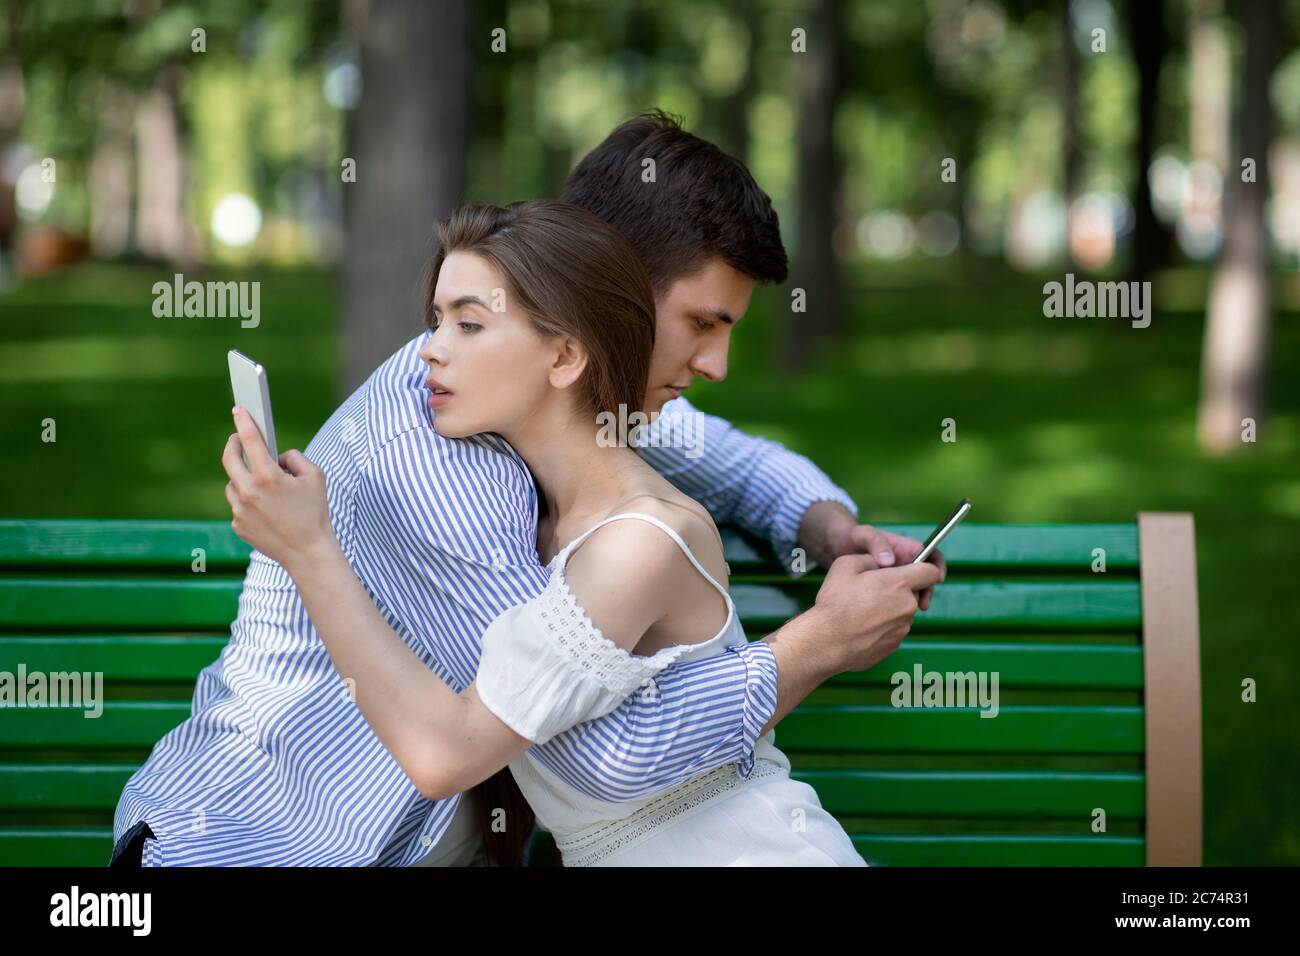 Gadget addicted couple using mobile phones while embracing on bench at park Stock Photo